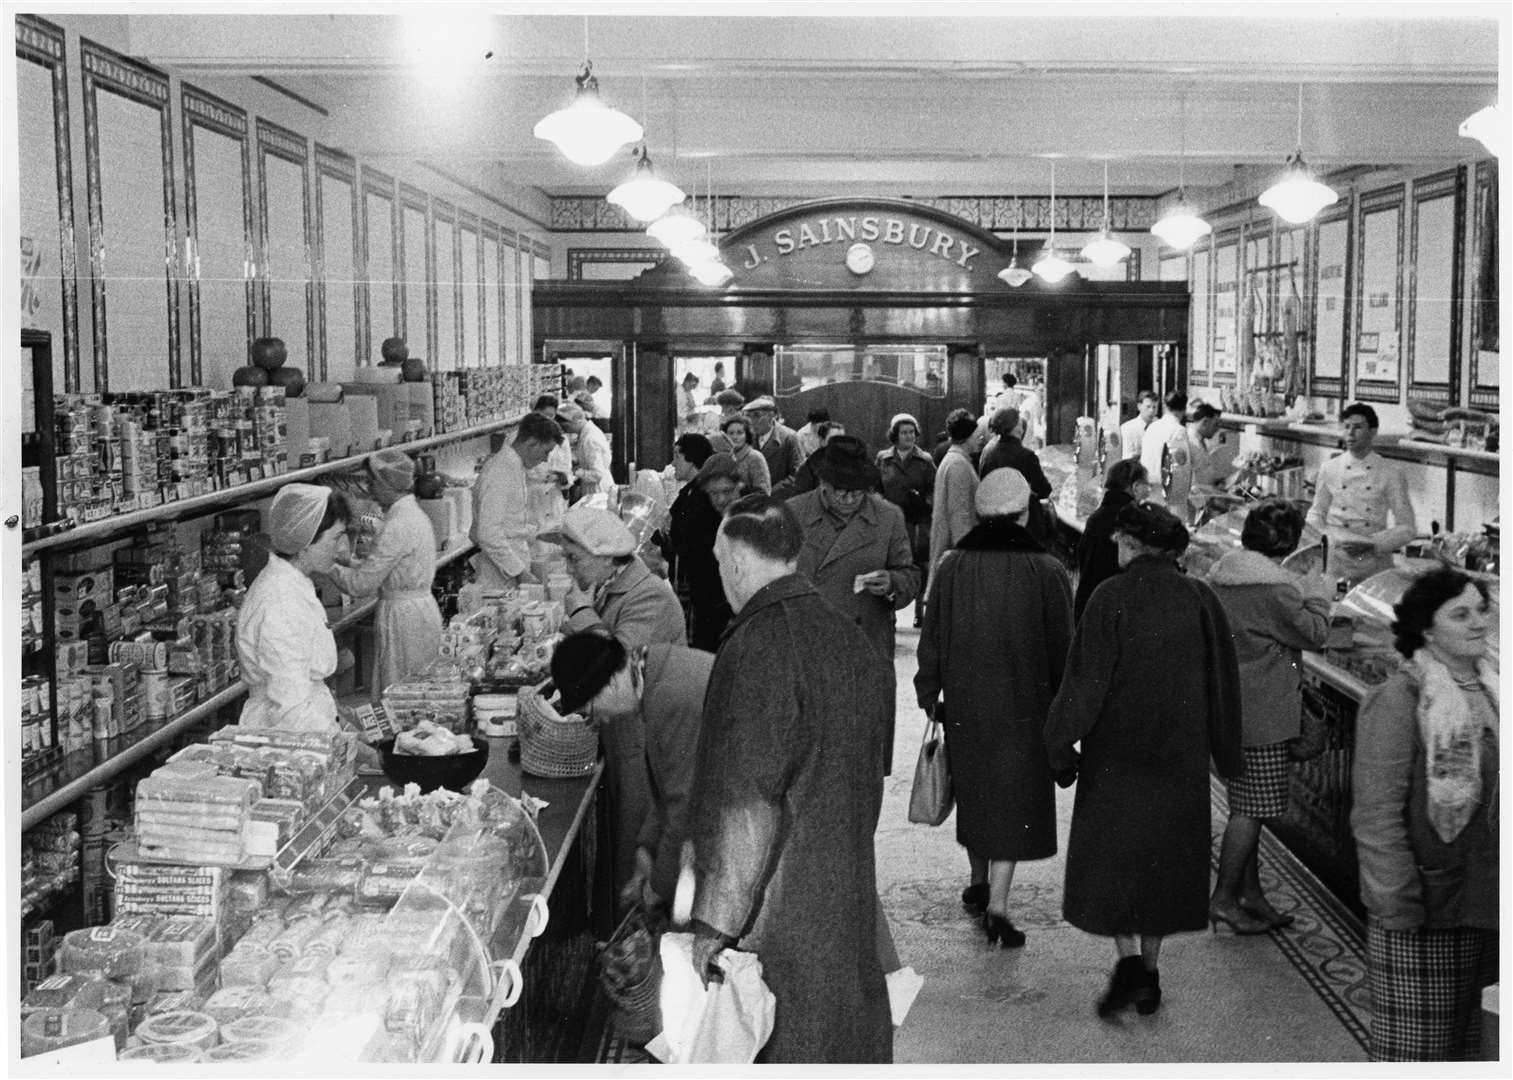 Inside the Ashford store at 18 High Street, in 1961. Picture: The Sainsbury Archive, Museum of London Docklands